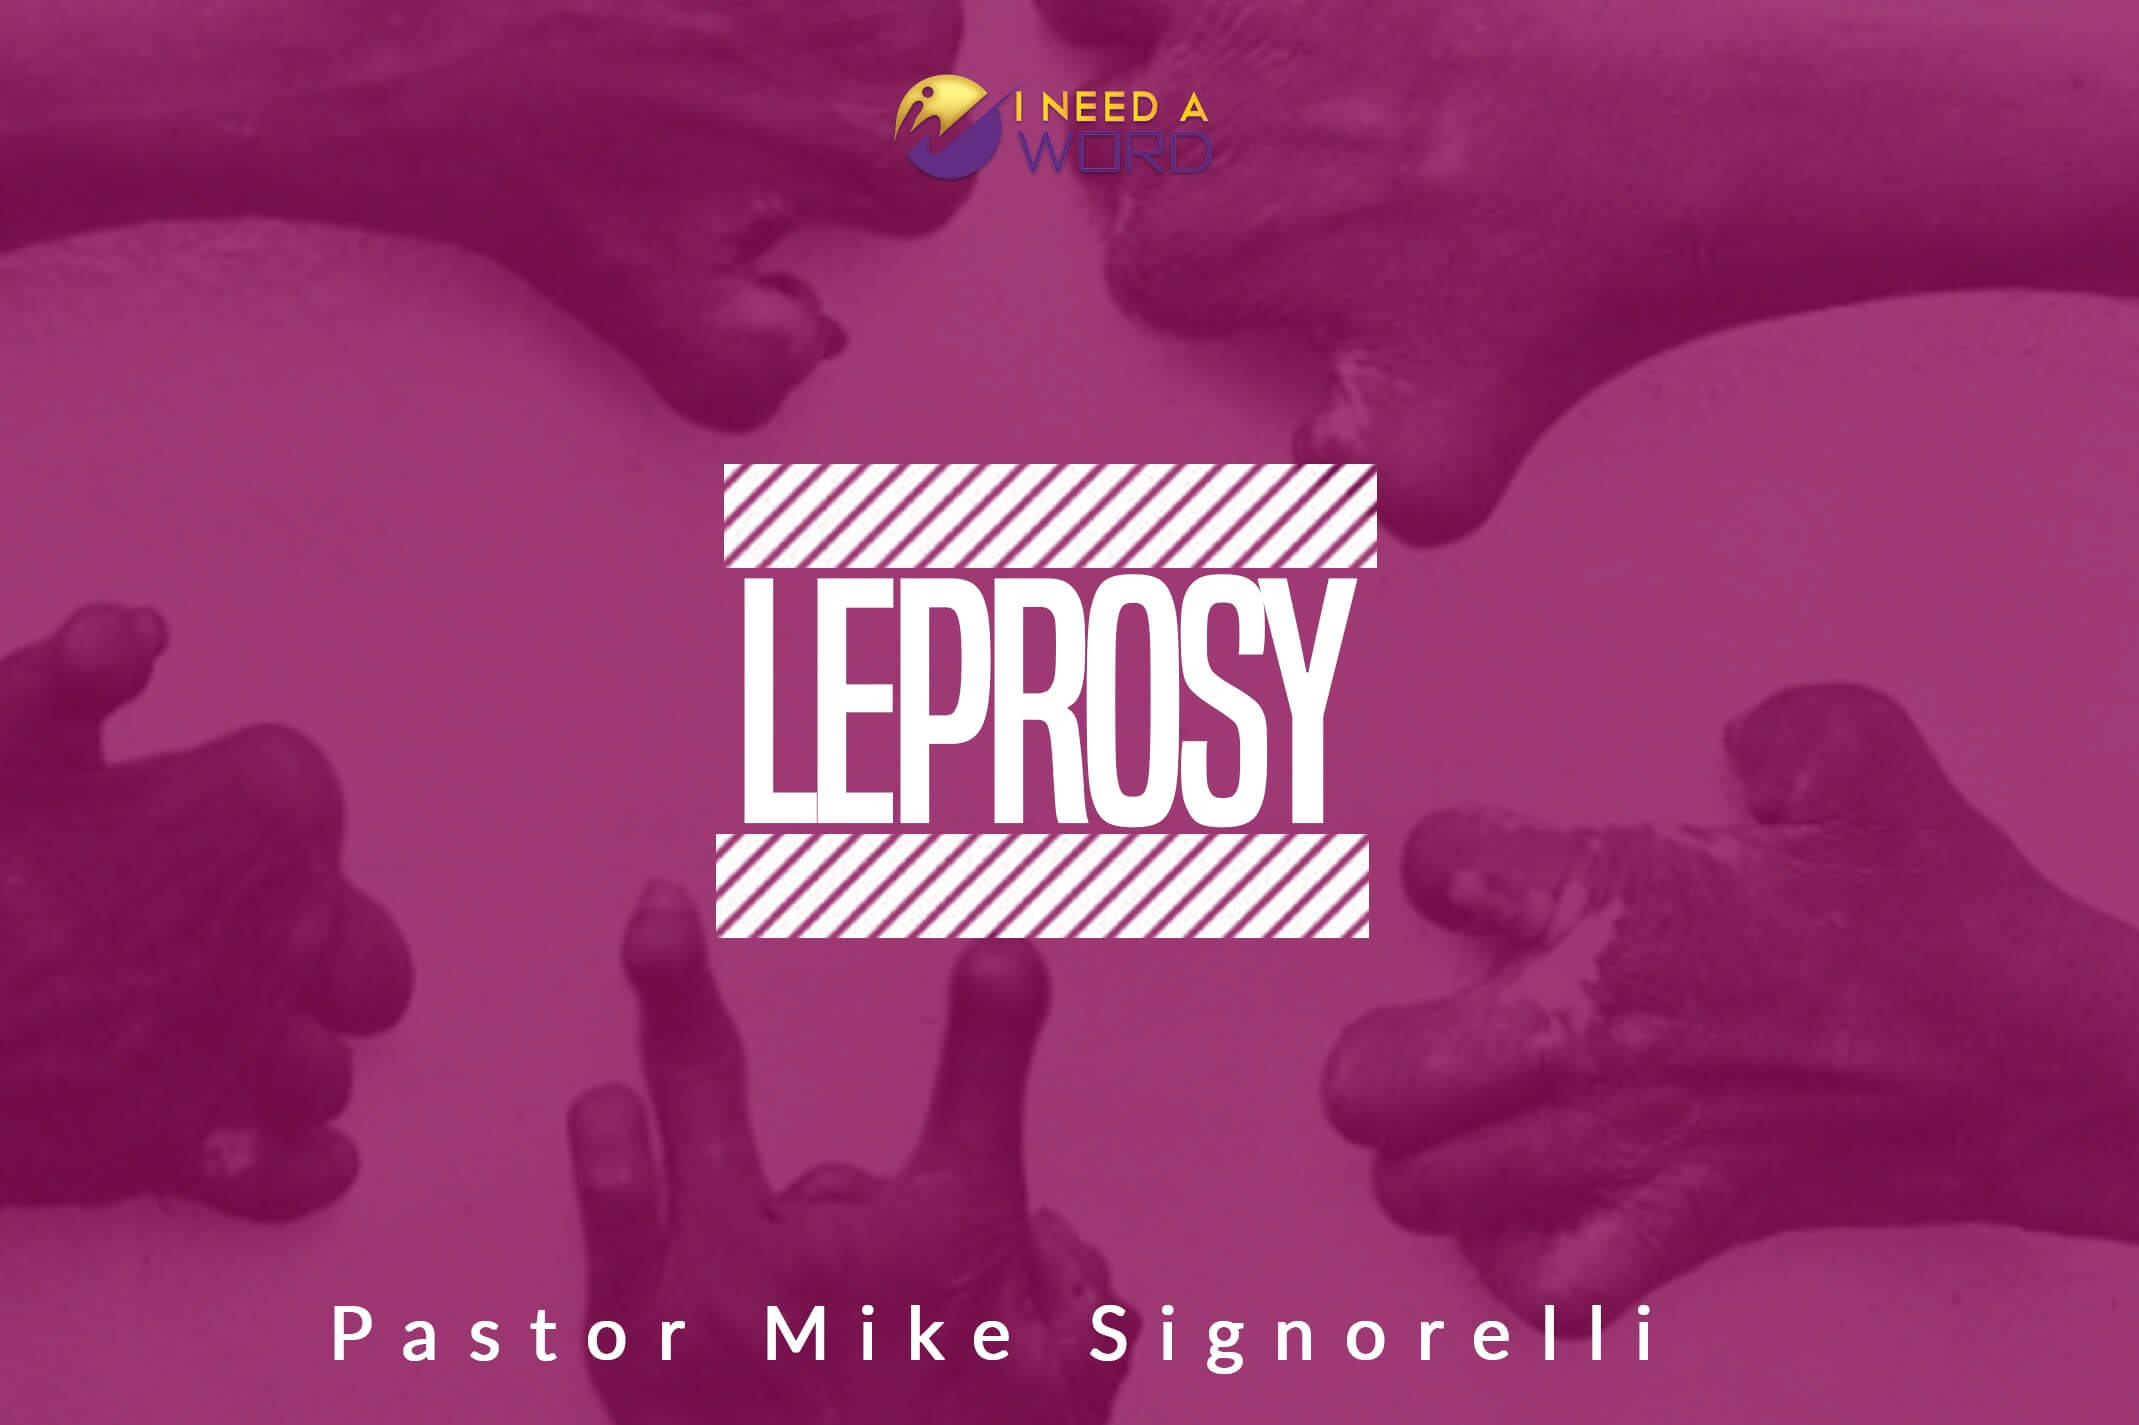 Leprosy By Pastor Mike Signorelli